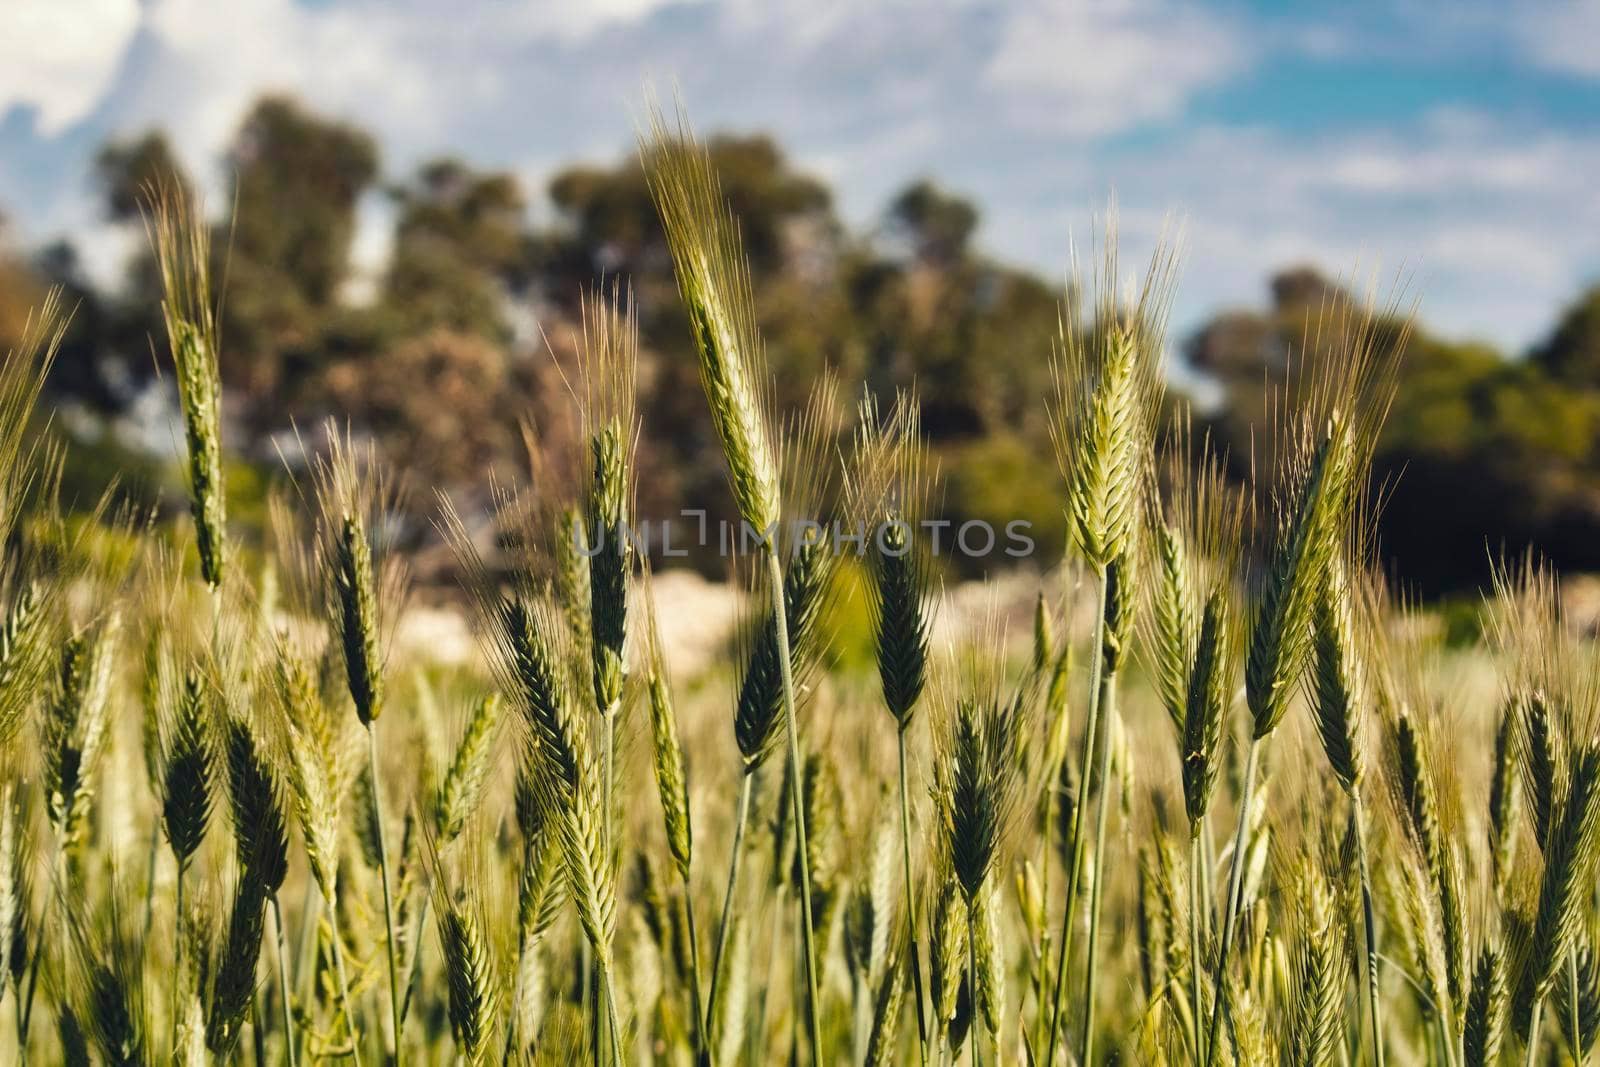 Sheaves of green wheat in an agricultural field in the countryside